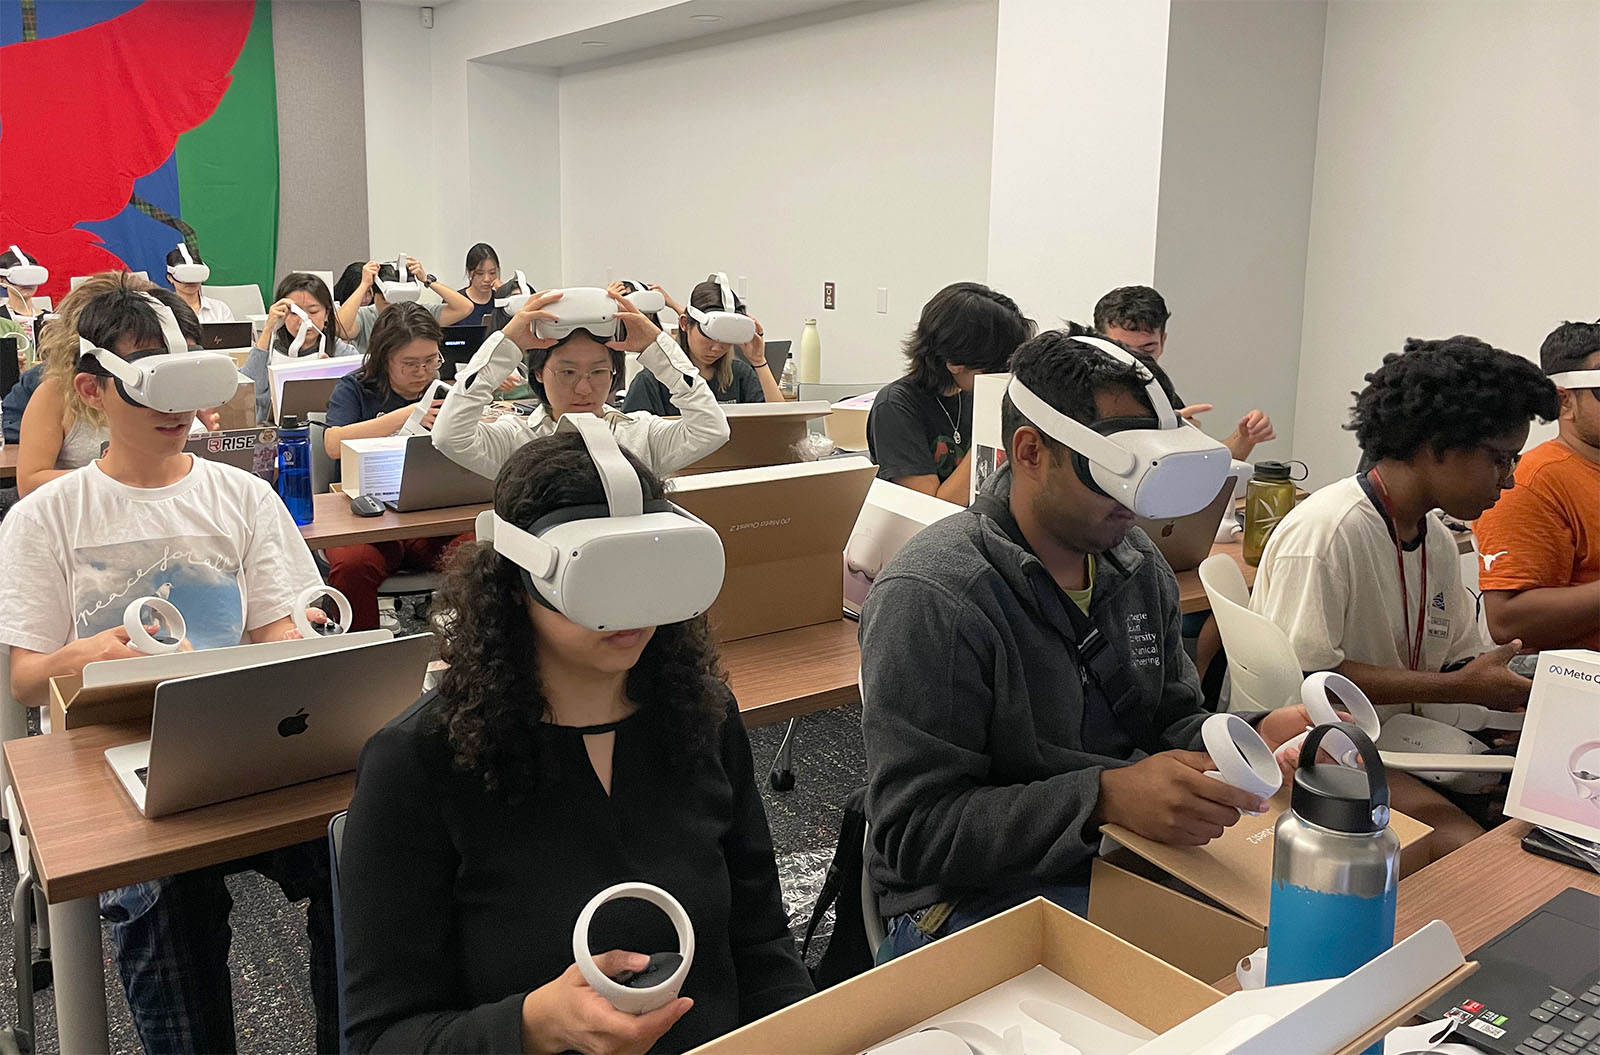 Classroom with approximately 20 students sitting at tables while wearing Virtual Reality headsets